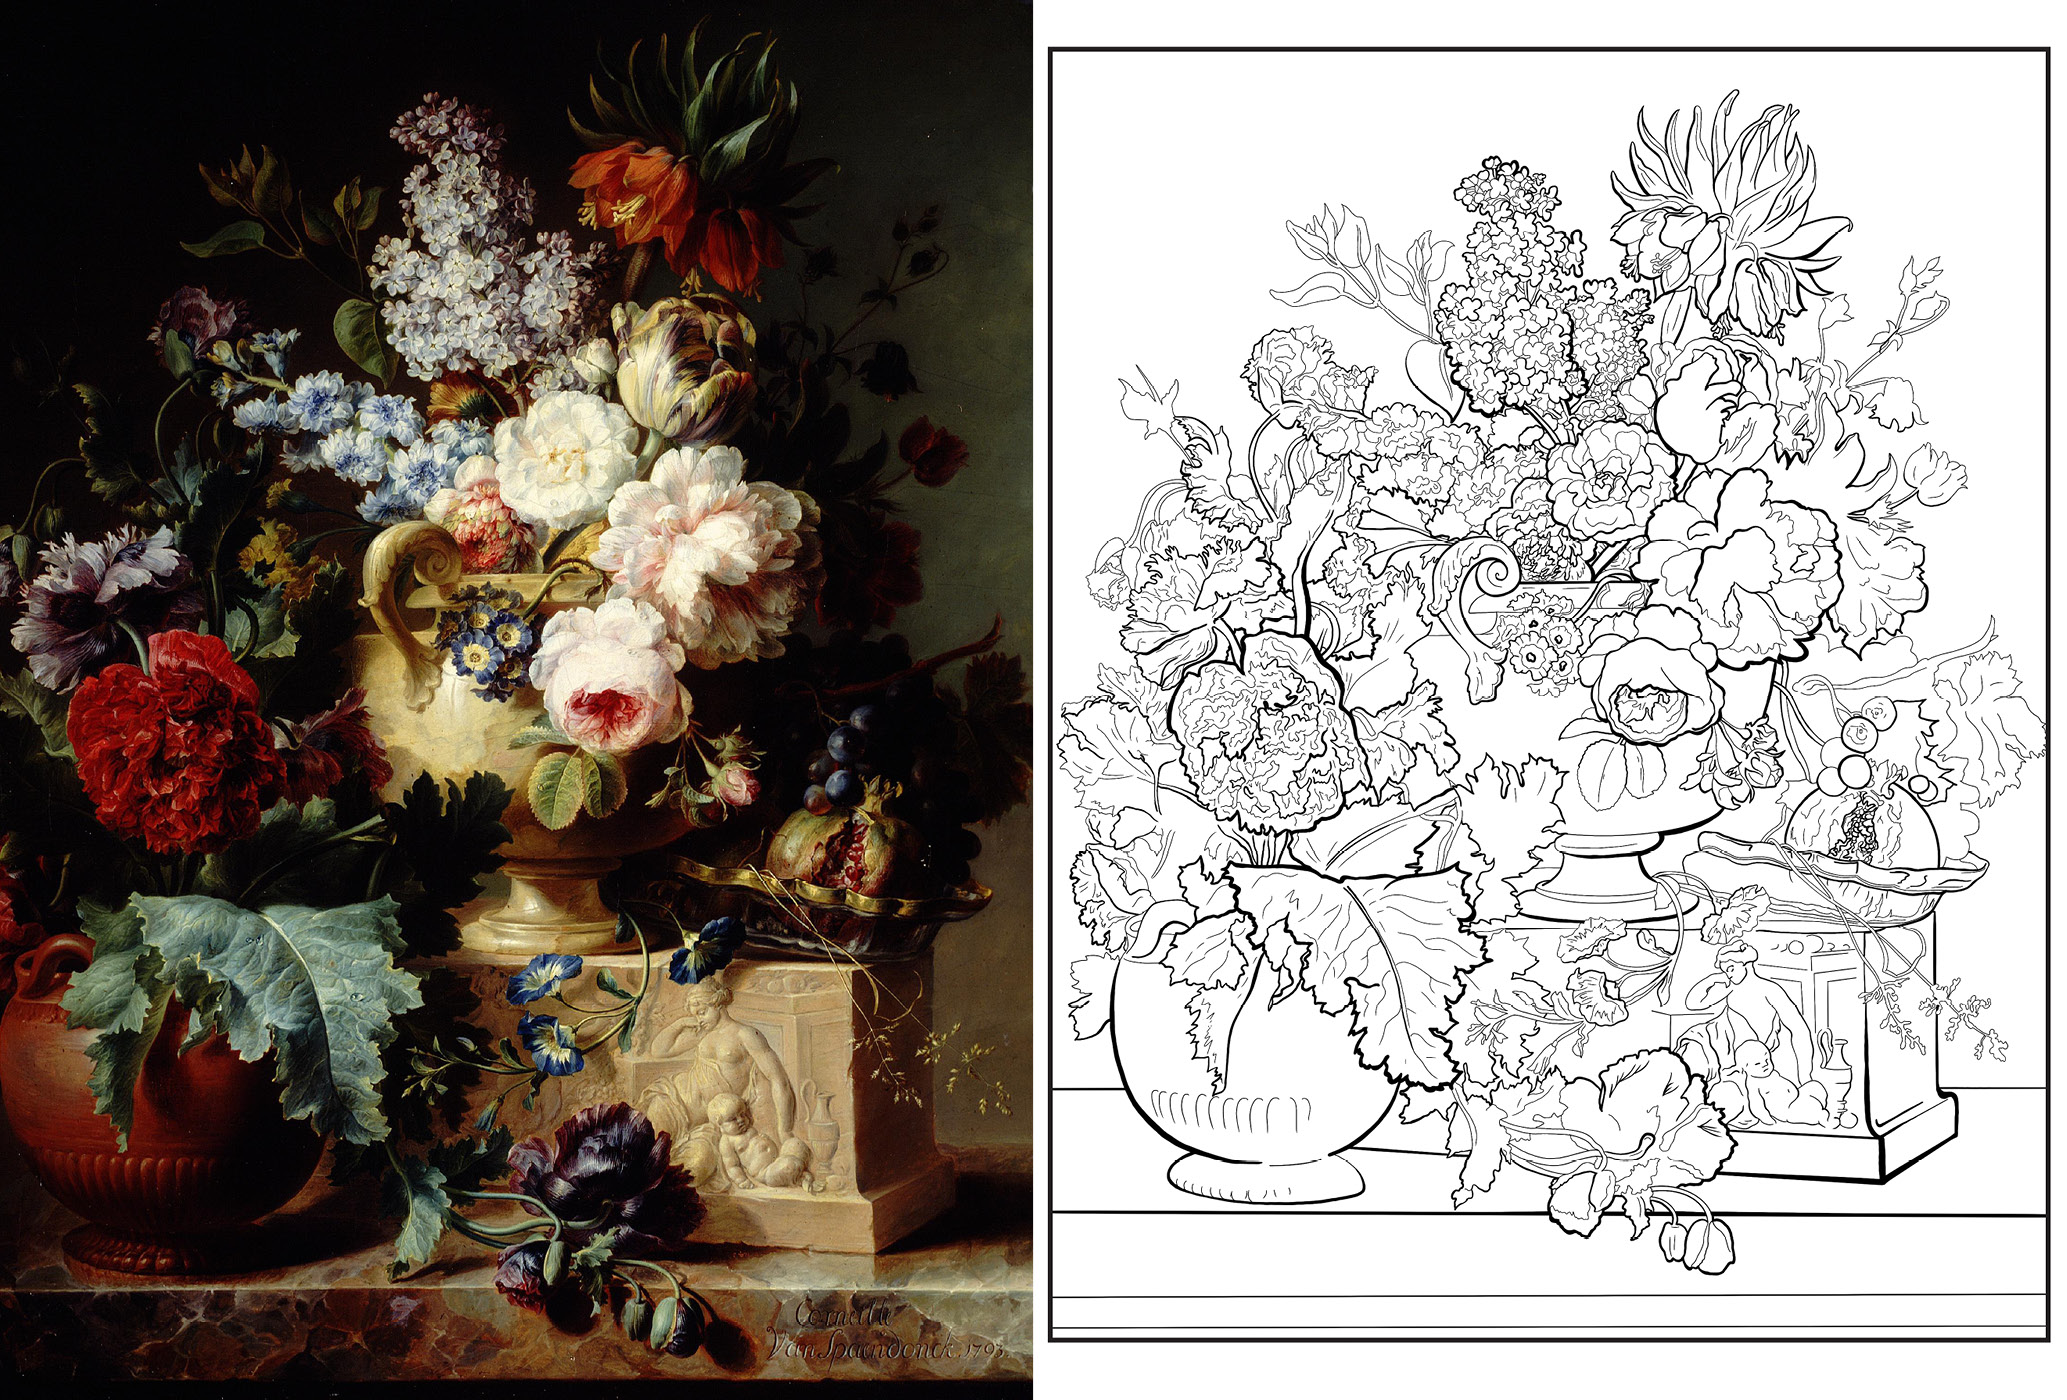 An oil painting of flowers next to a black outline of the same painting to color in